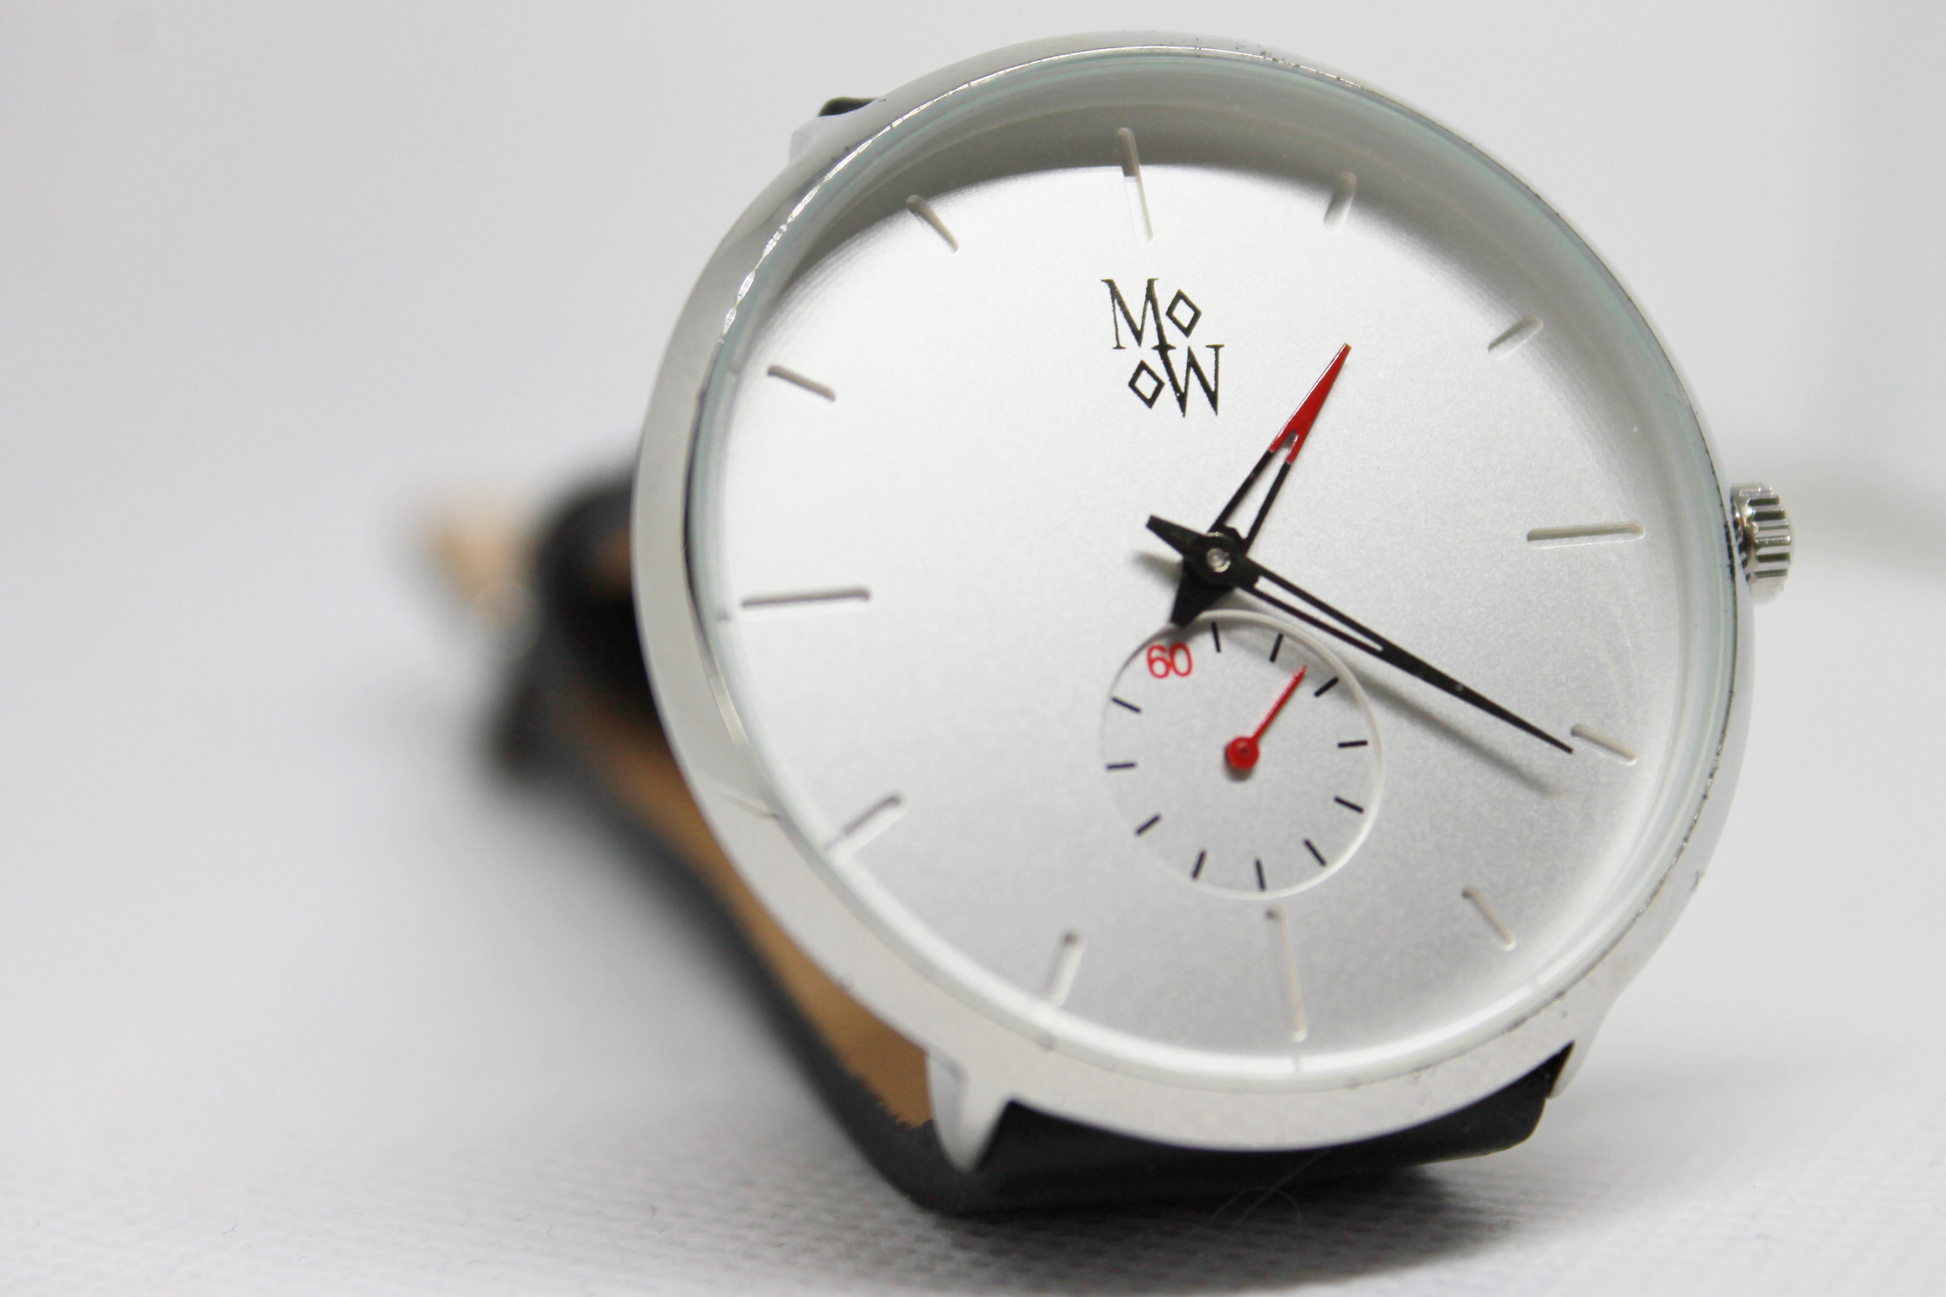 Limited Edition Toronto White With Red Accent - The Mobilio Watch Company